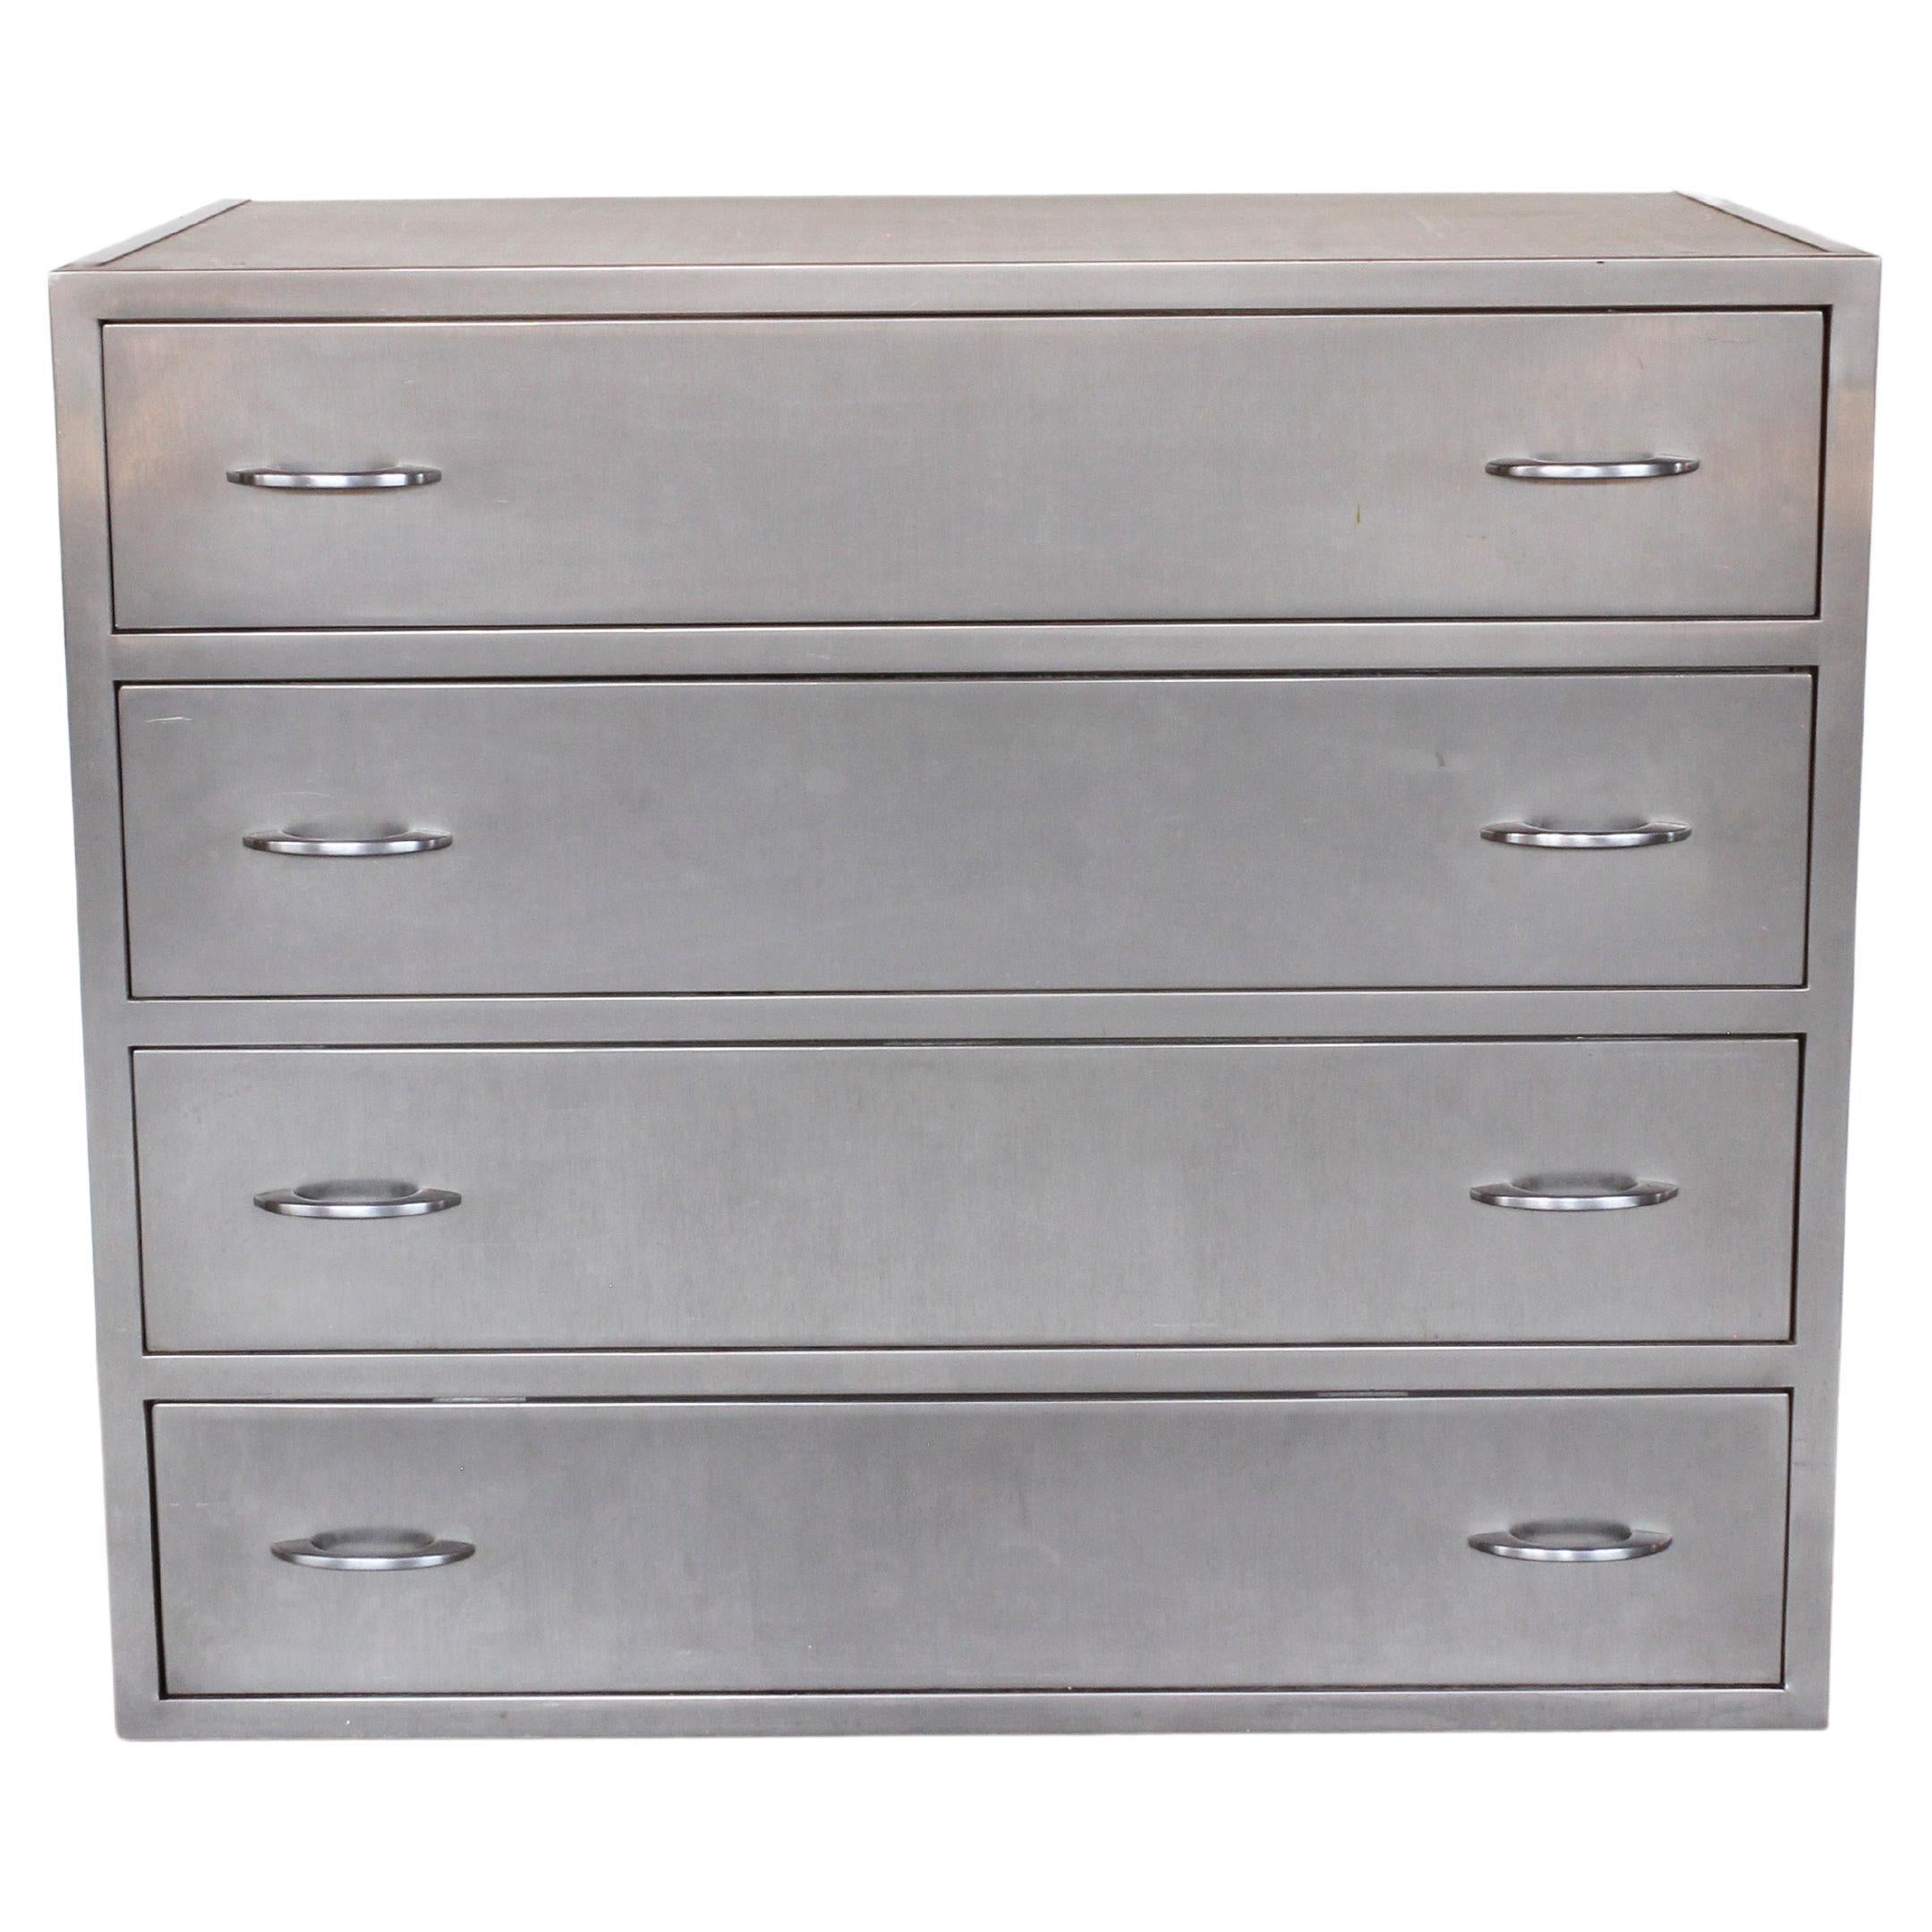 American Industrial Stainless Steel Chest With 4 Drawers, C. 1940s For Sale